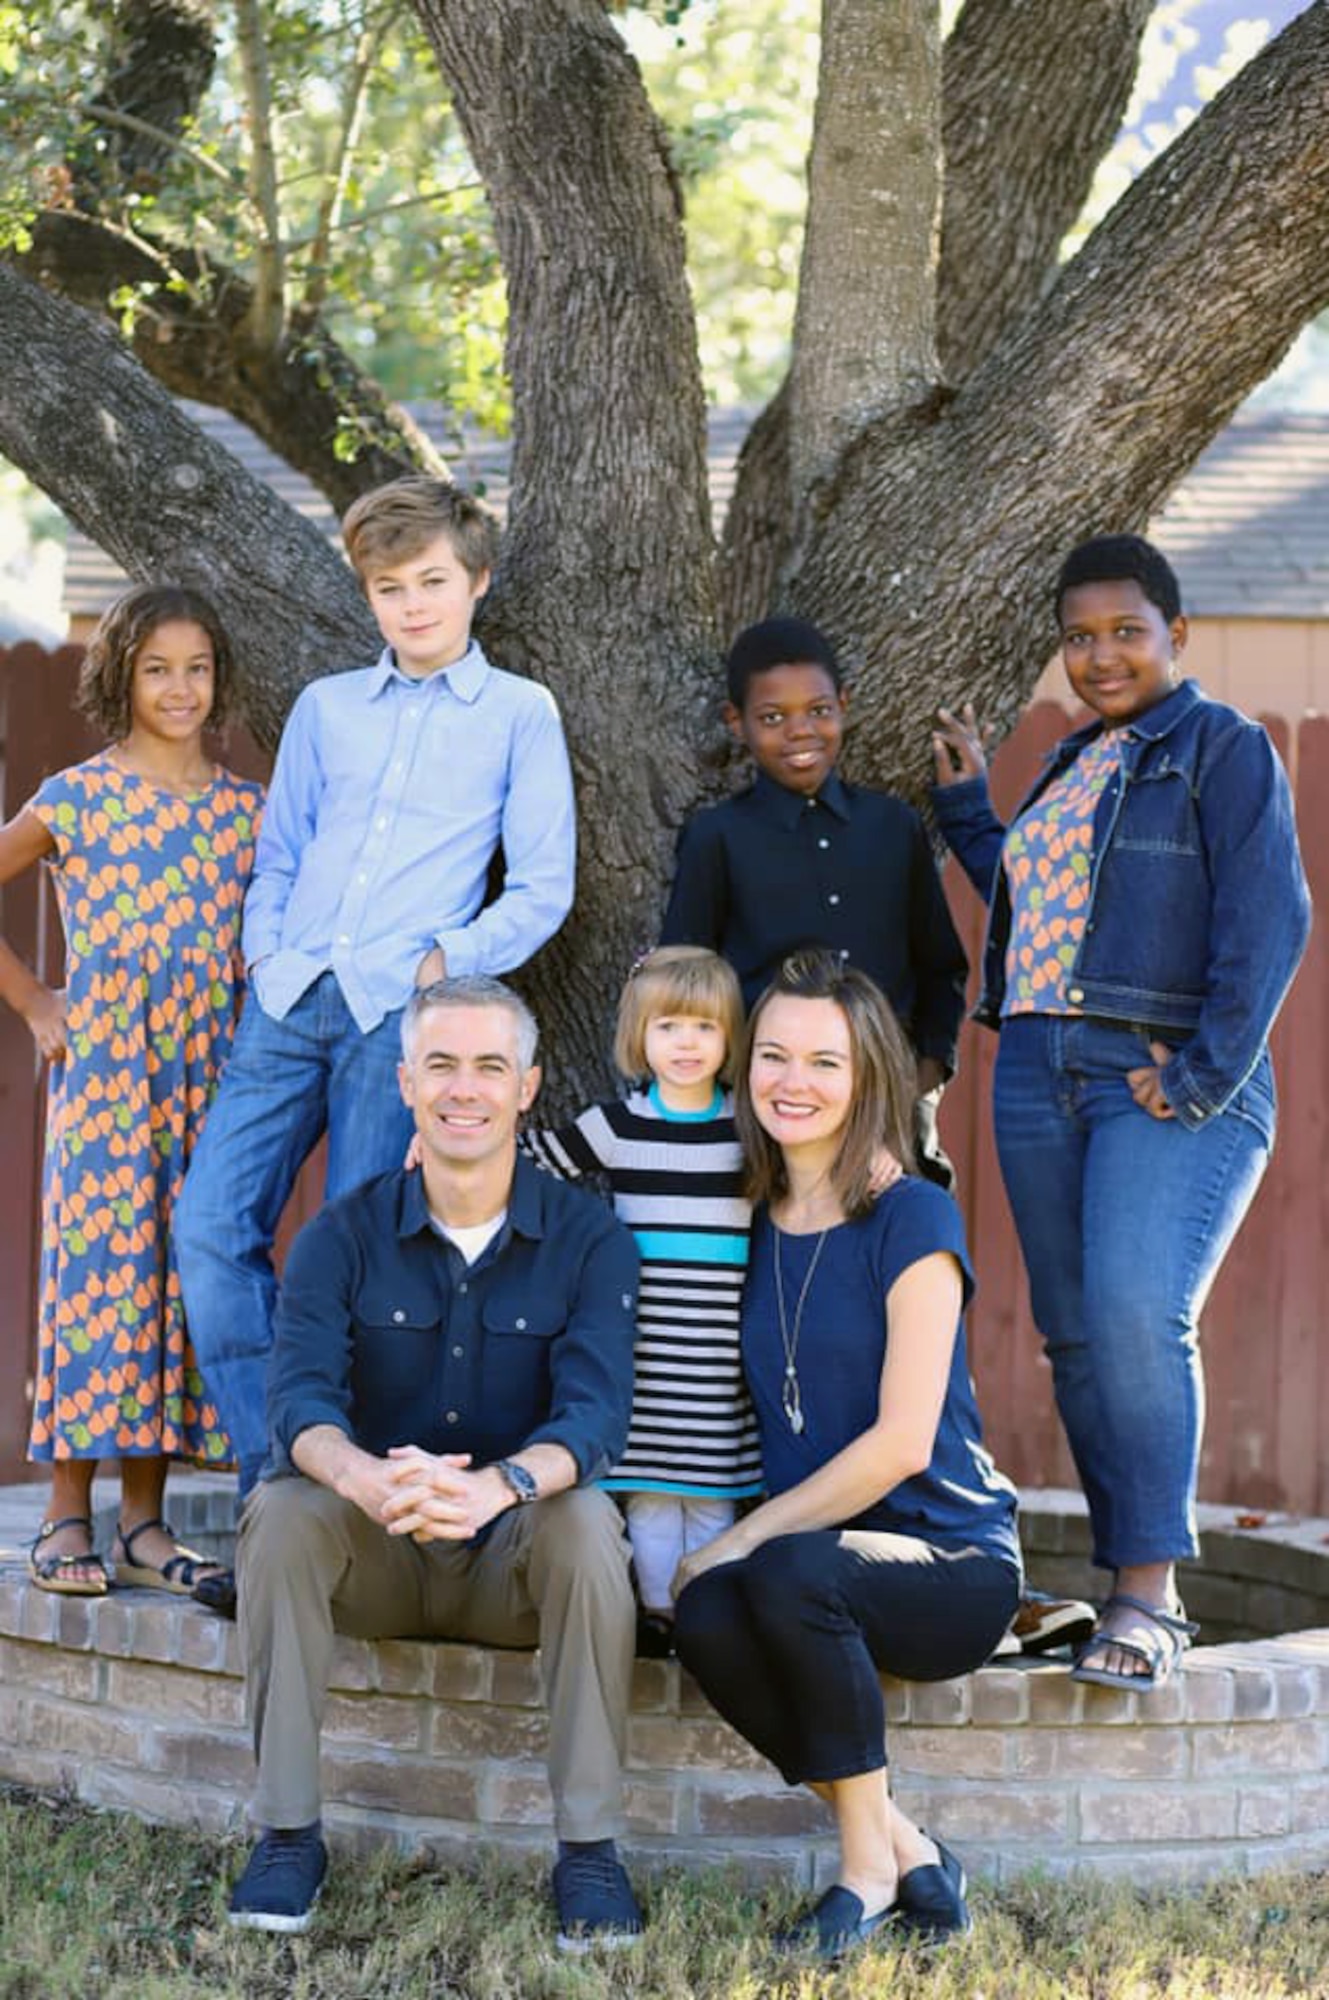 The Menendez family, now in San Antonio, Texas, in October 2020. Their motto, “We love because He first loved us.” Forefront, Maj. Matt Menendez, Stevie, age 3, and Evan Menendez. Second row; Kimmie, 11; Zack, 13; Lenny, 12 and Nya, 13. (Courtesy photo)